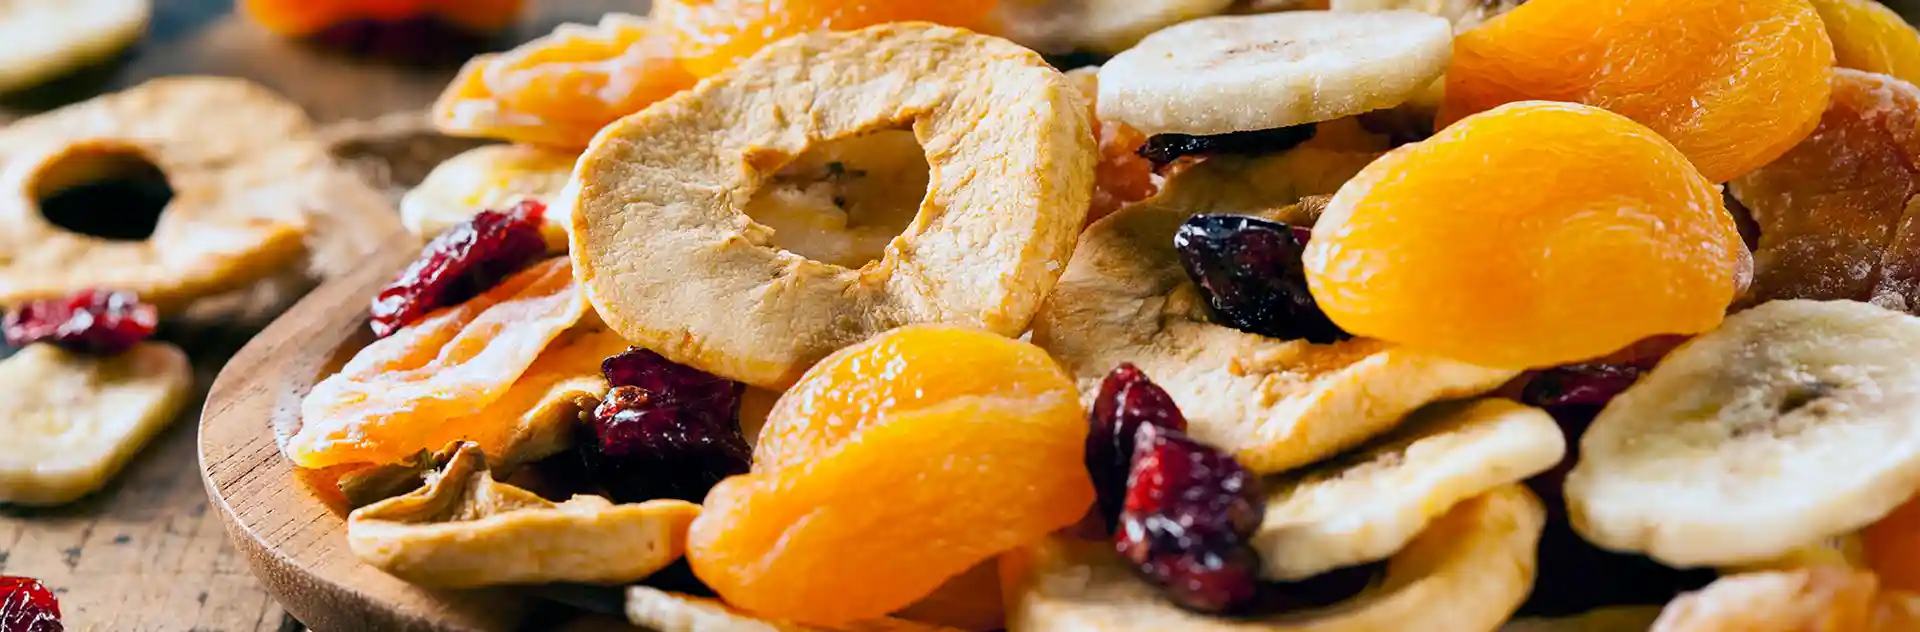 dried fruits and legumes